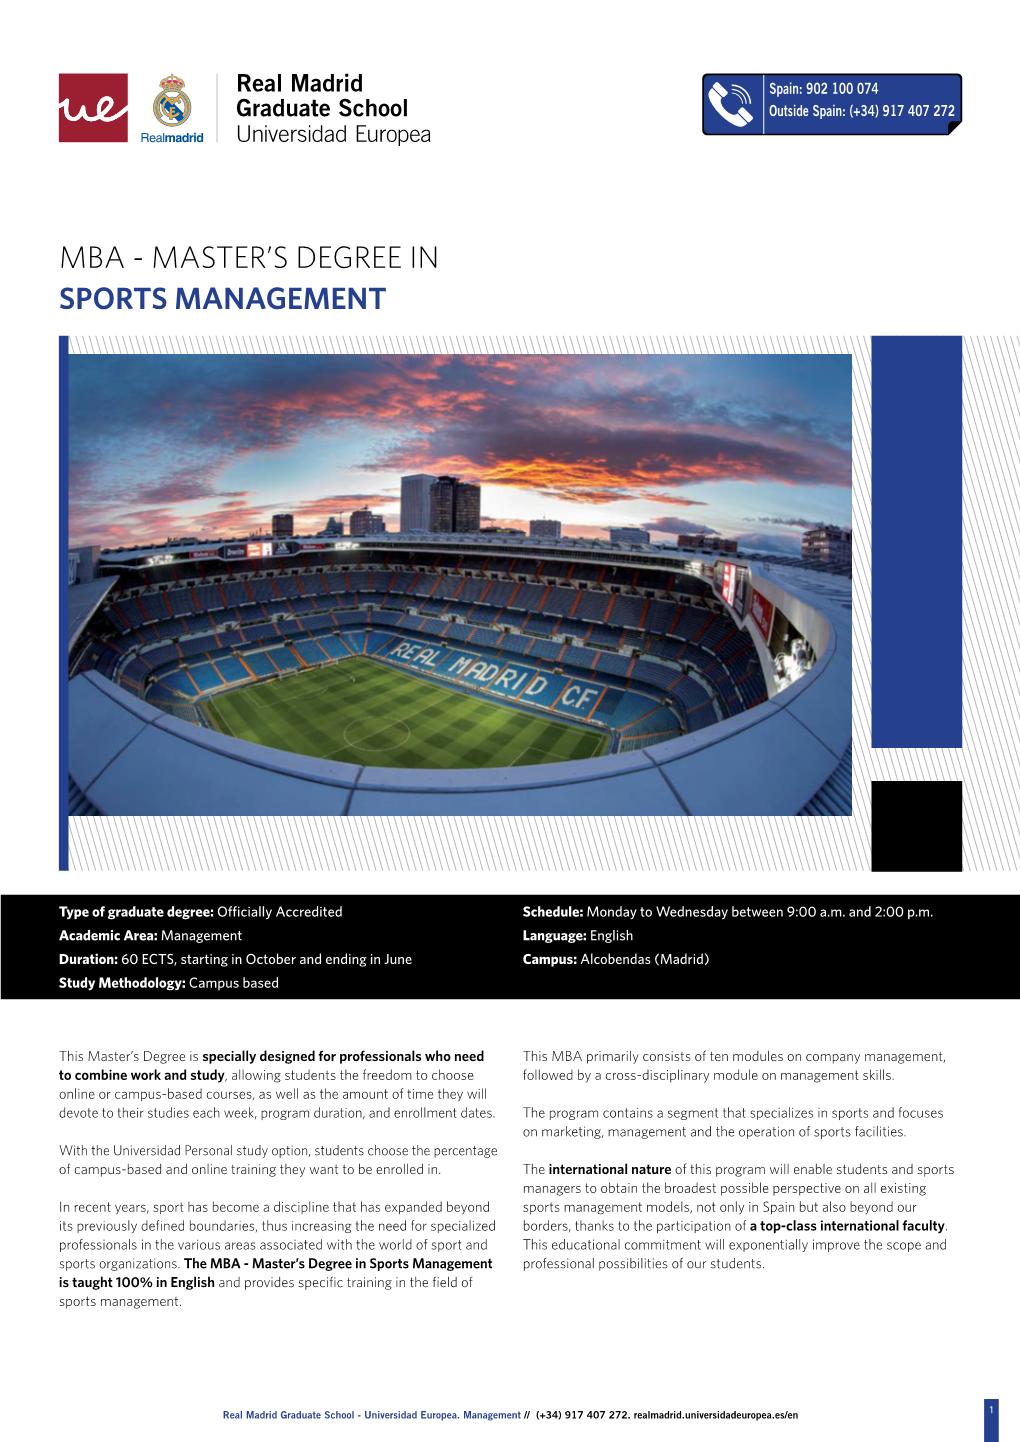 Mba - Master’S Degree in Sports Management